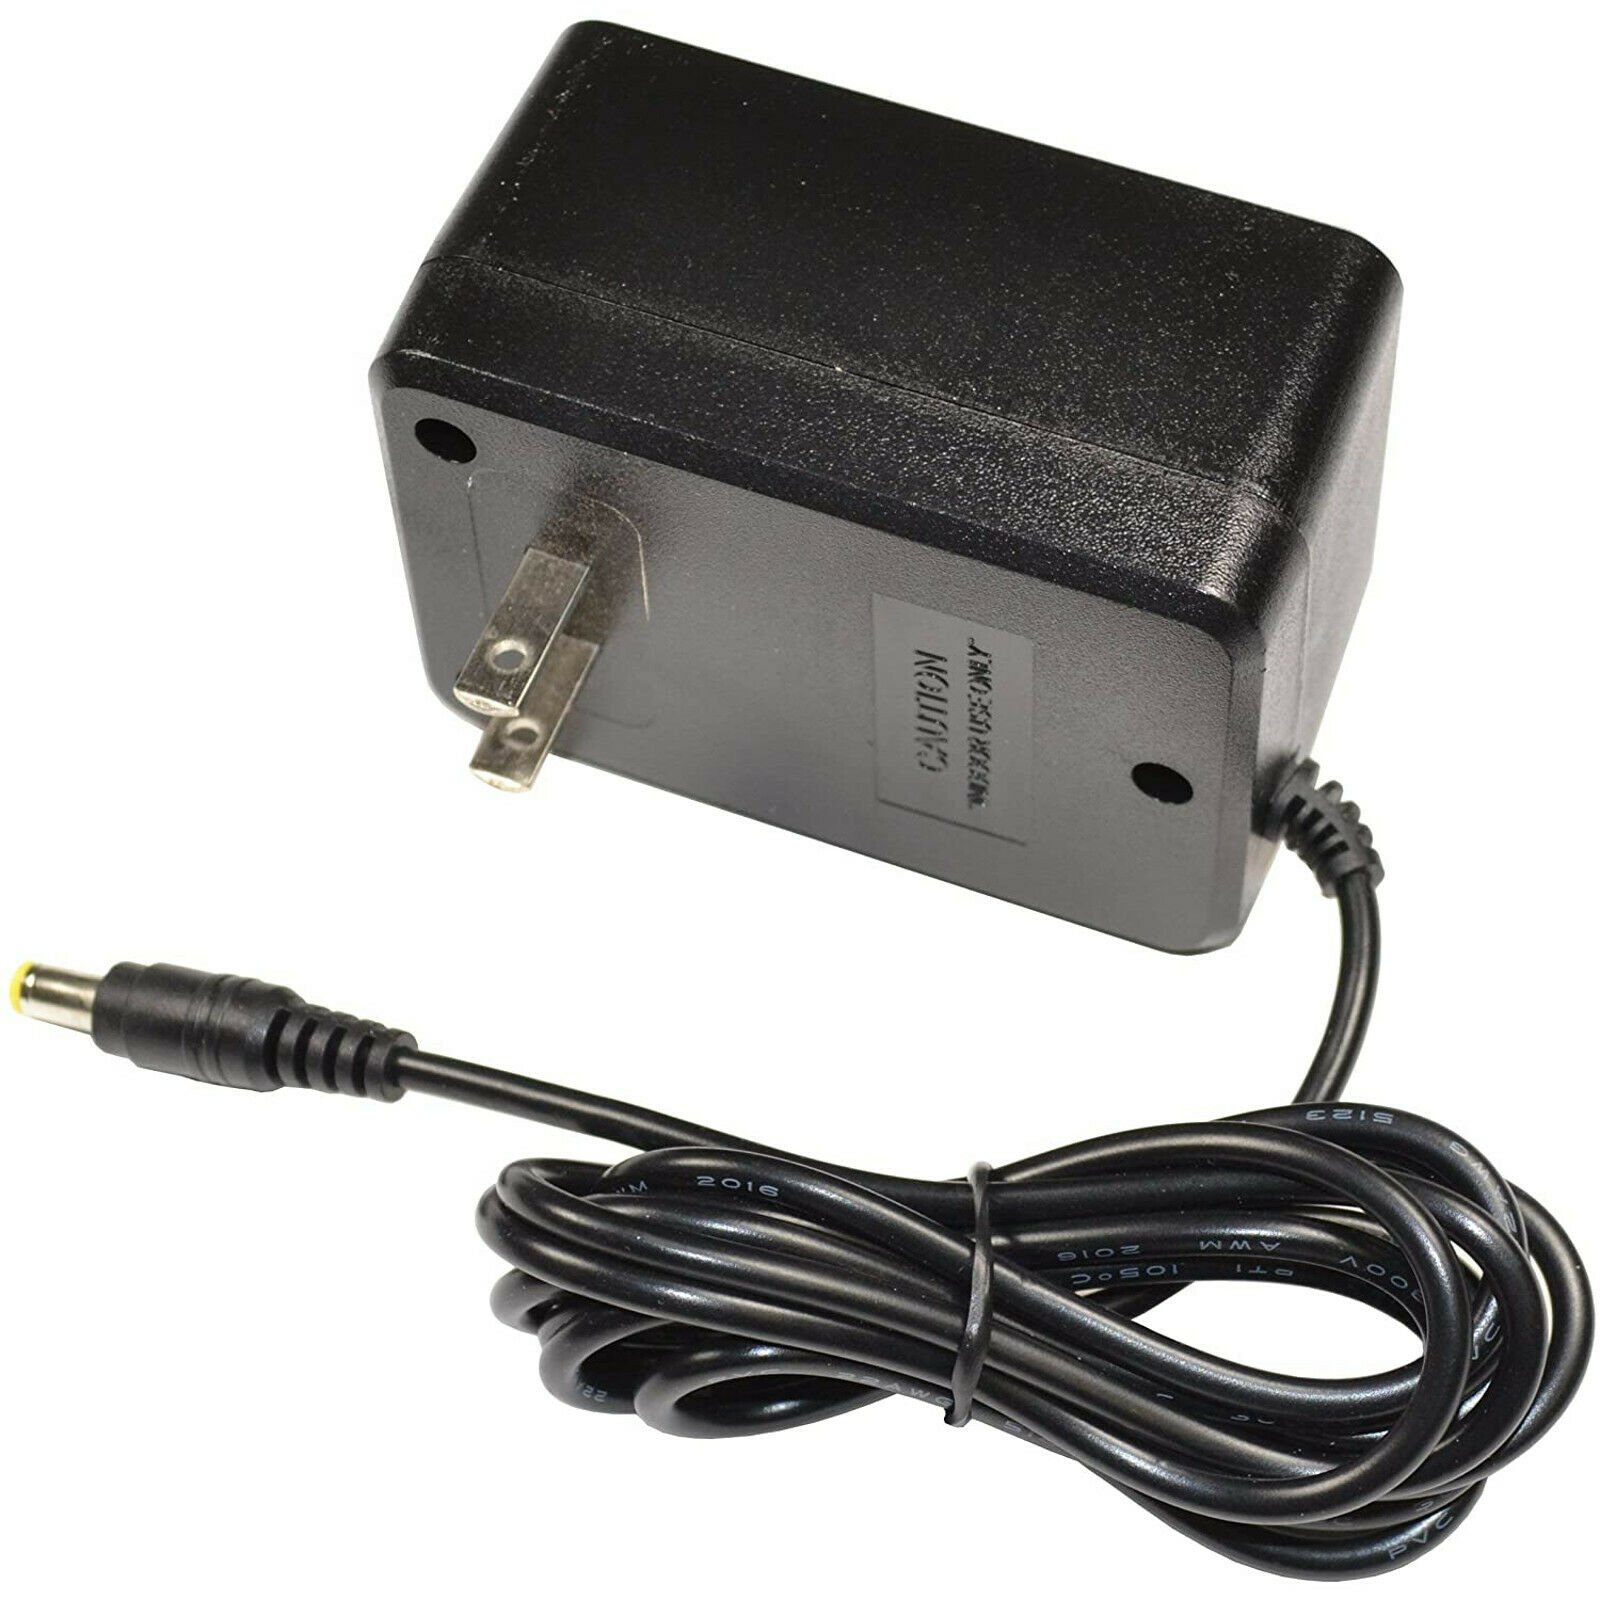 *Brand NEW* 12V AC Power Adapter / Battery Charger compatible with COLEMAN 5342 / 5348 Lanterns